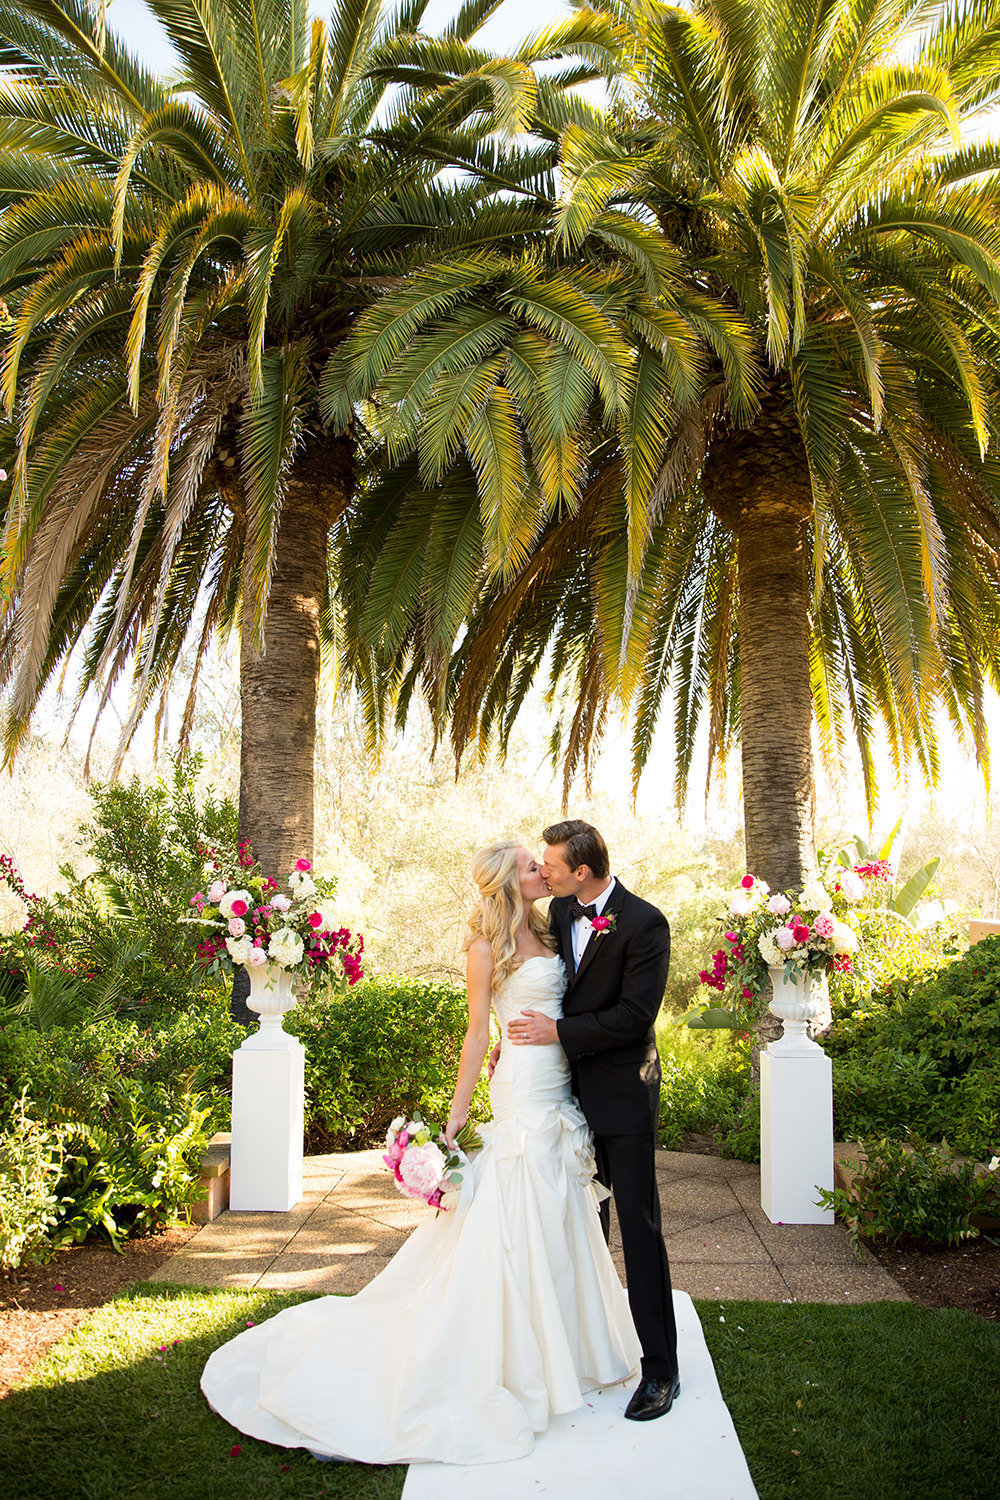 Bright colors an palm trees frame this elegant couple